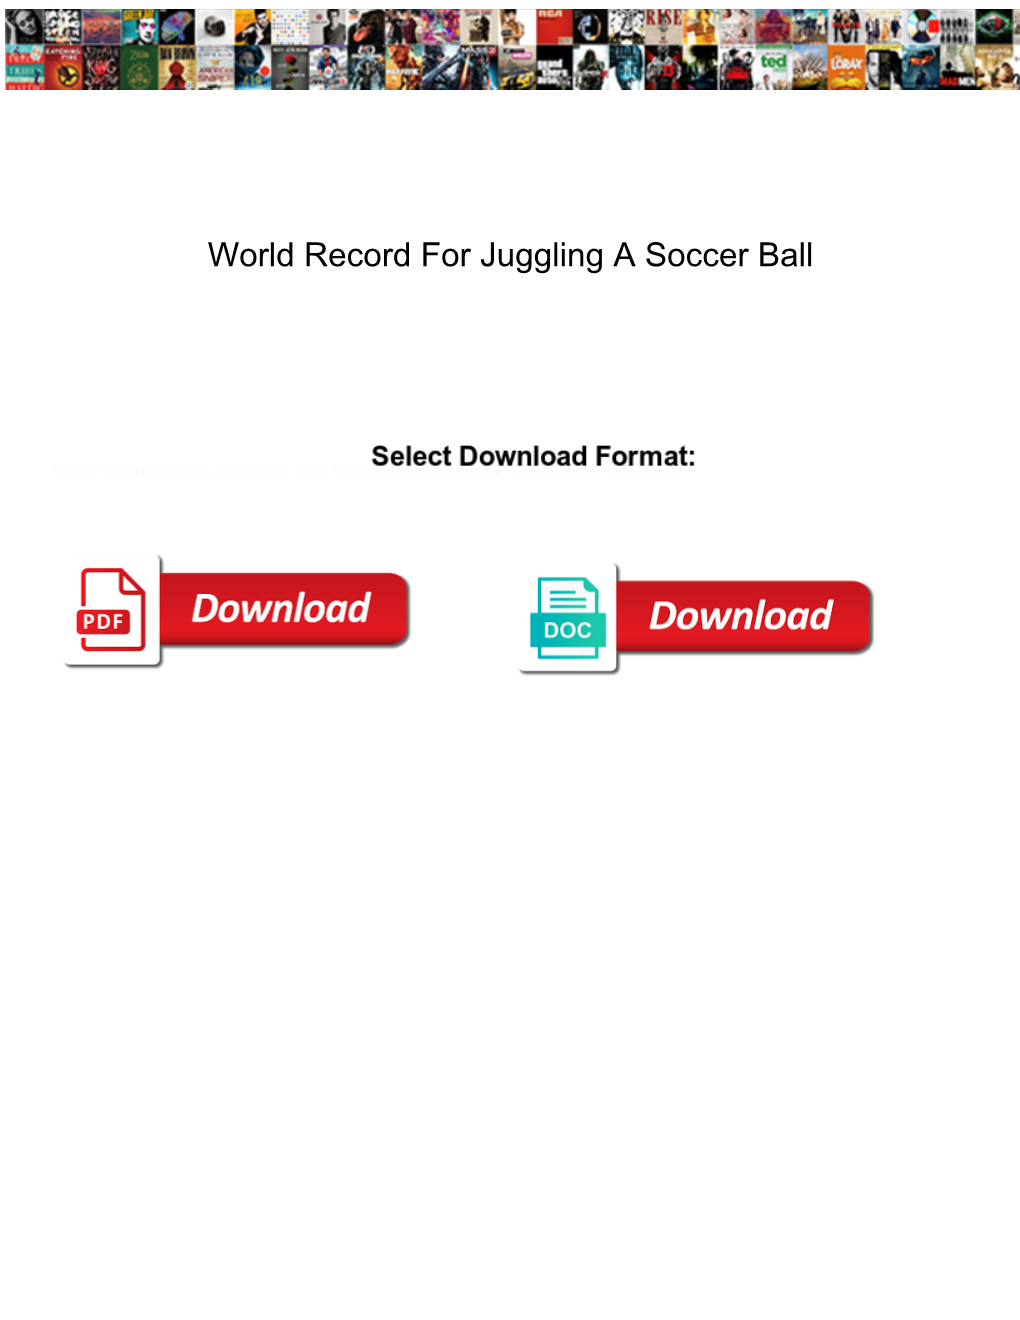 World Record for Juggling a Soccer Ball